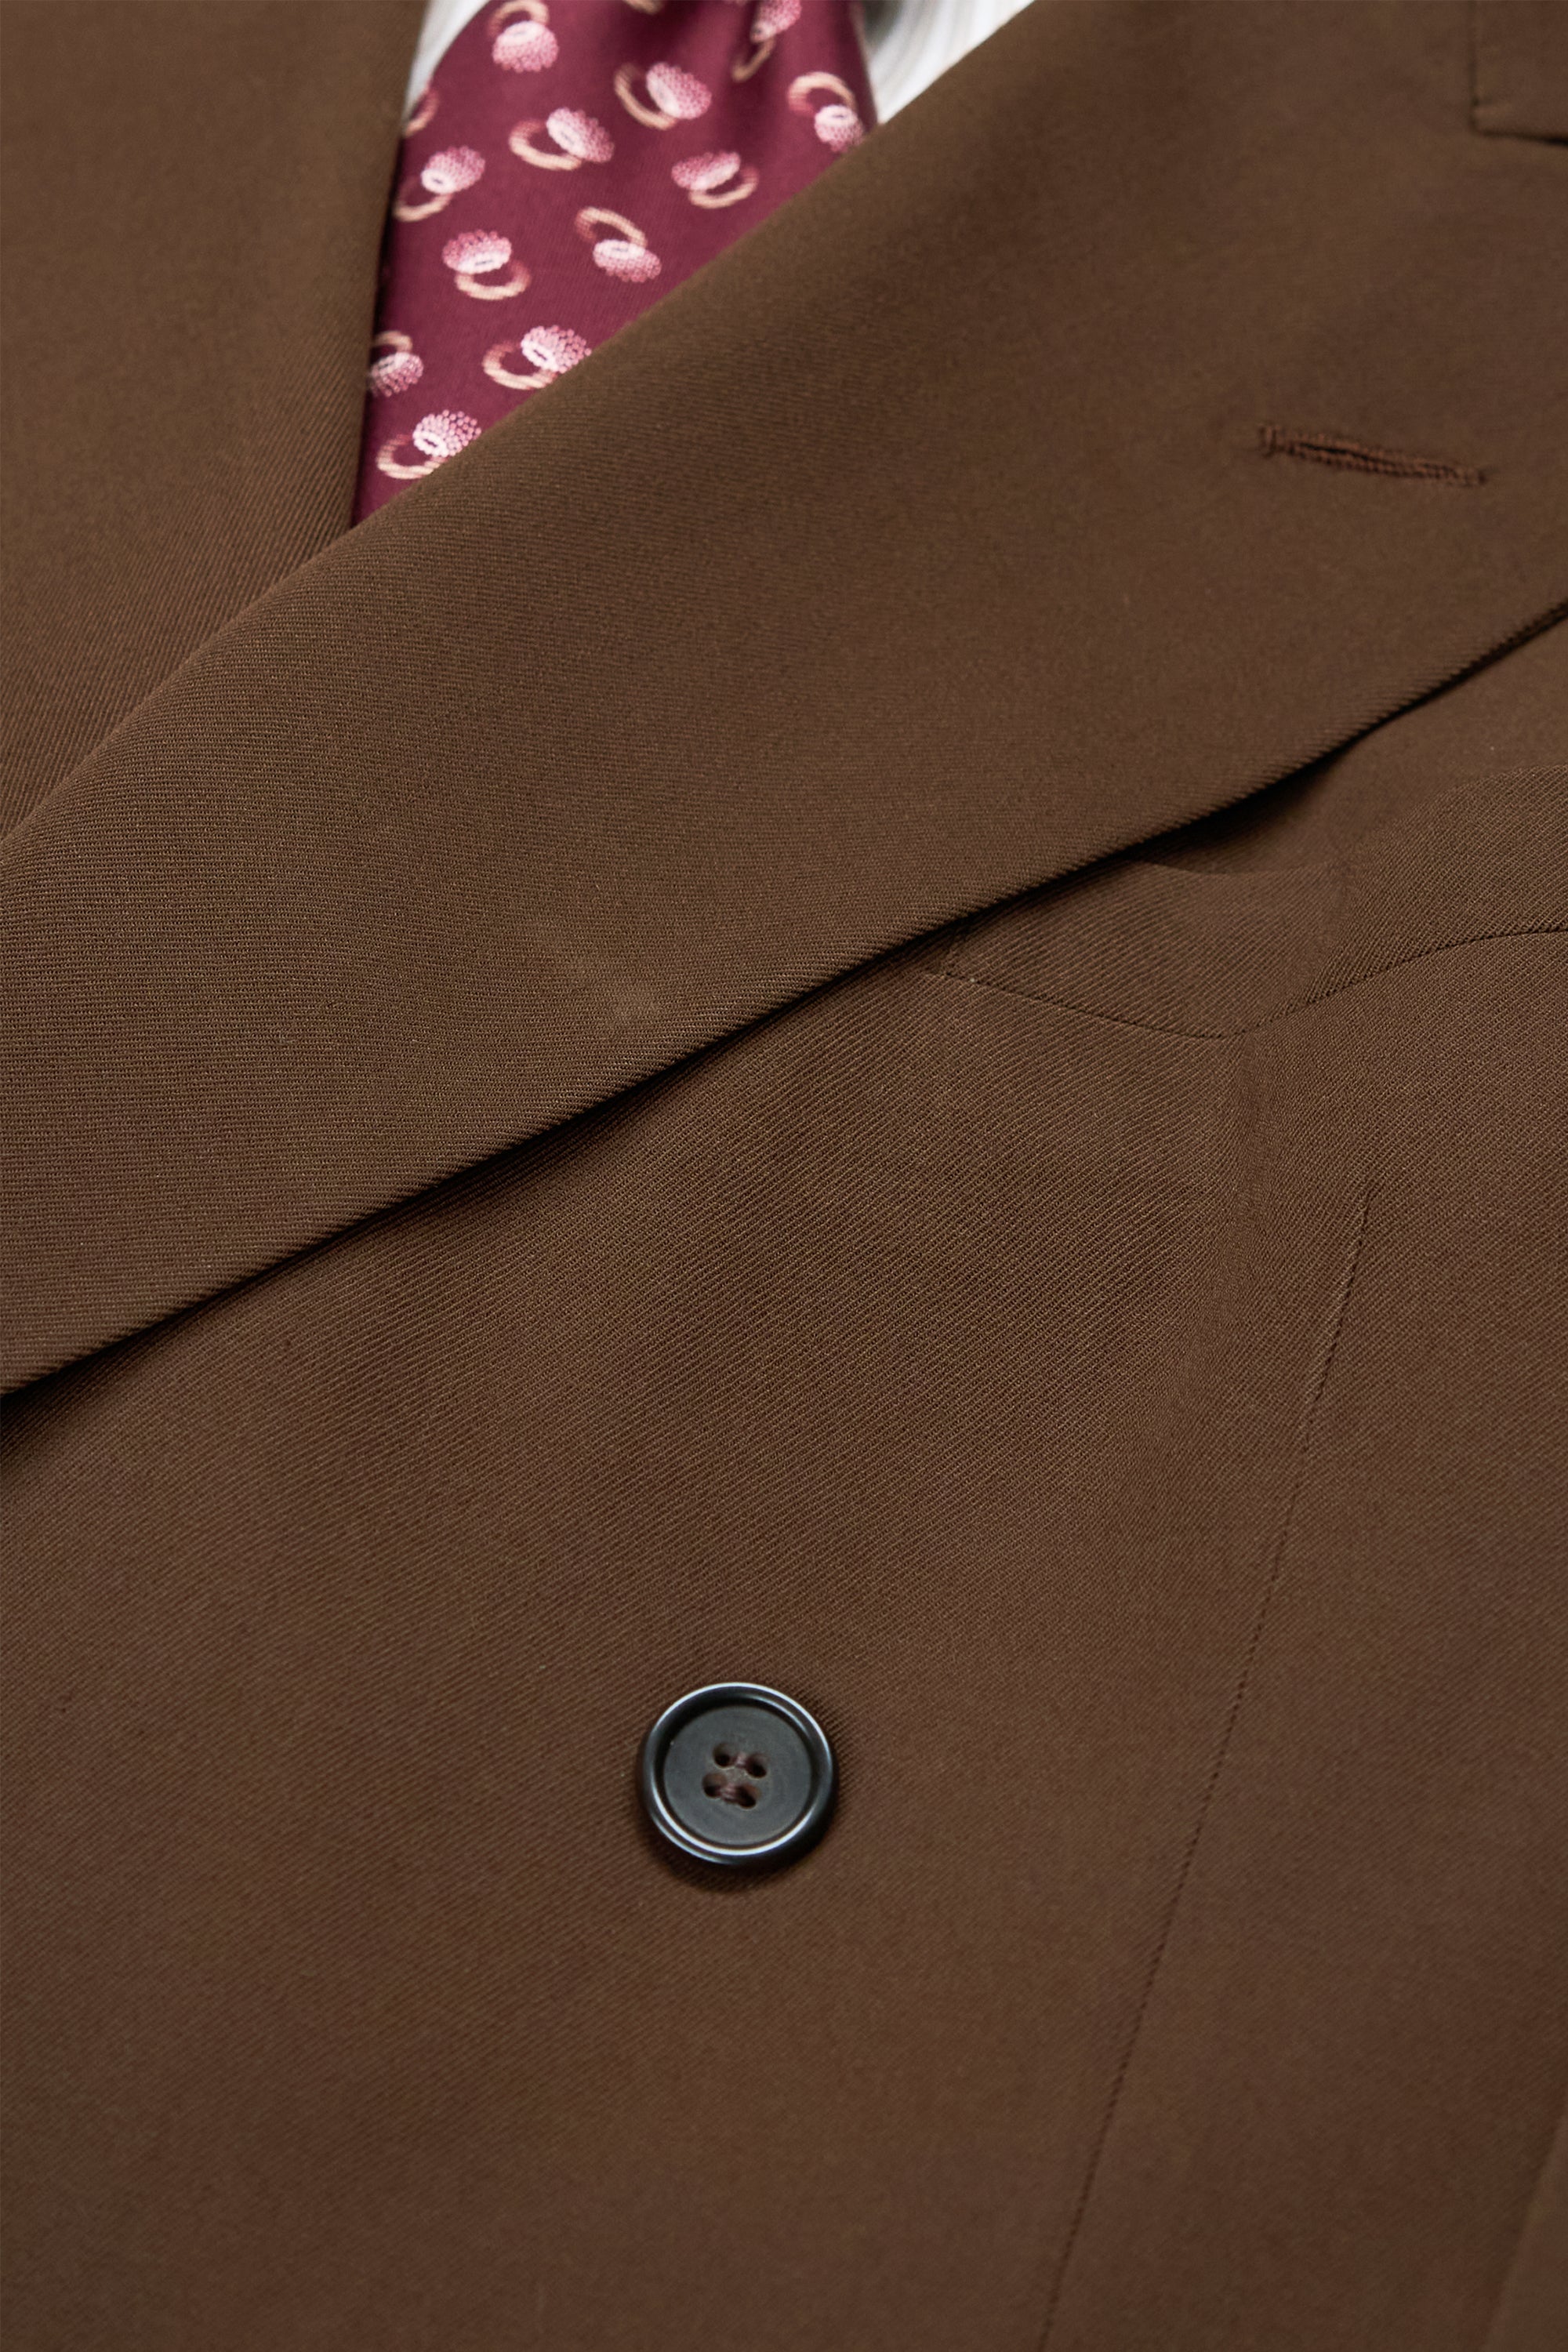 The House of Worsted-tex Brown Wool DB Sport Coat